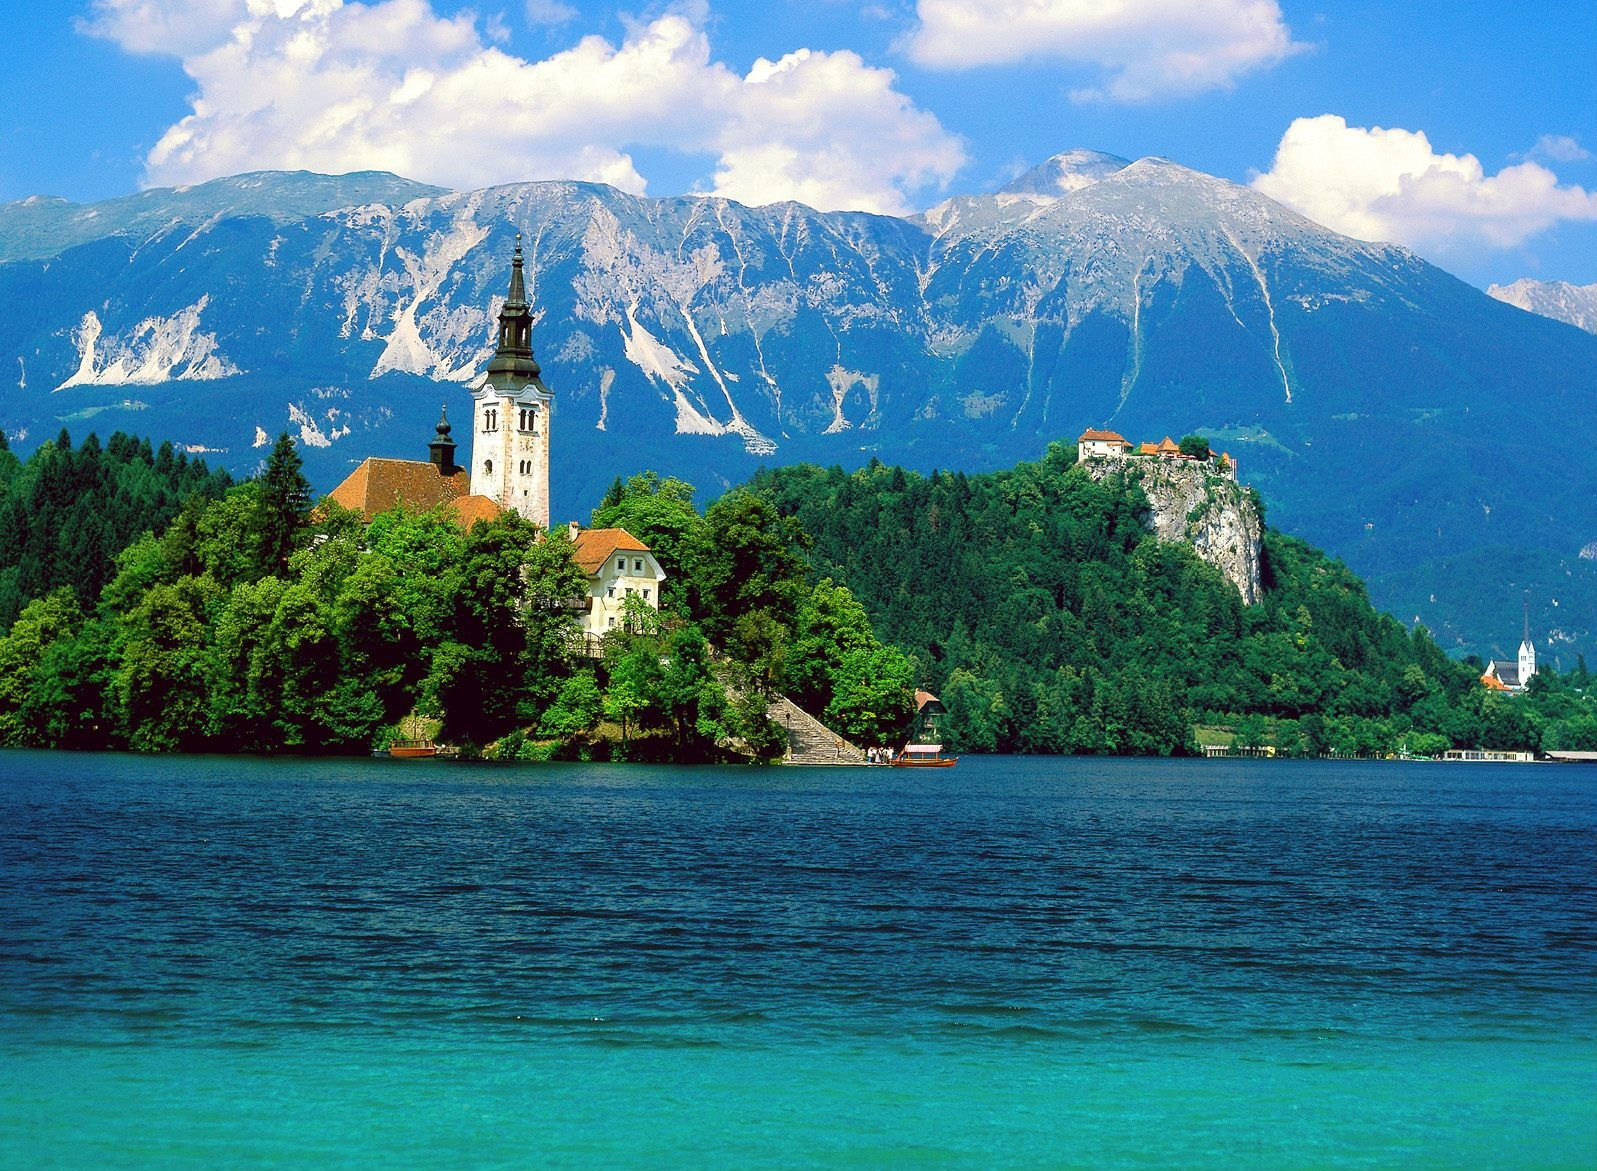 Scenic Lake Bled, Slovenia, offers a picturesque and serene desktop wallpaper option.